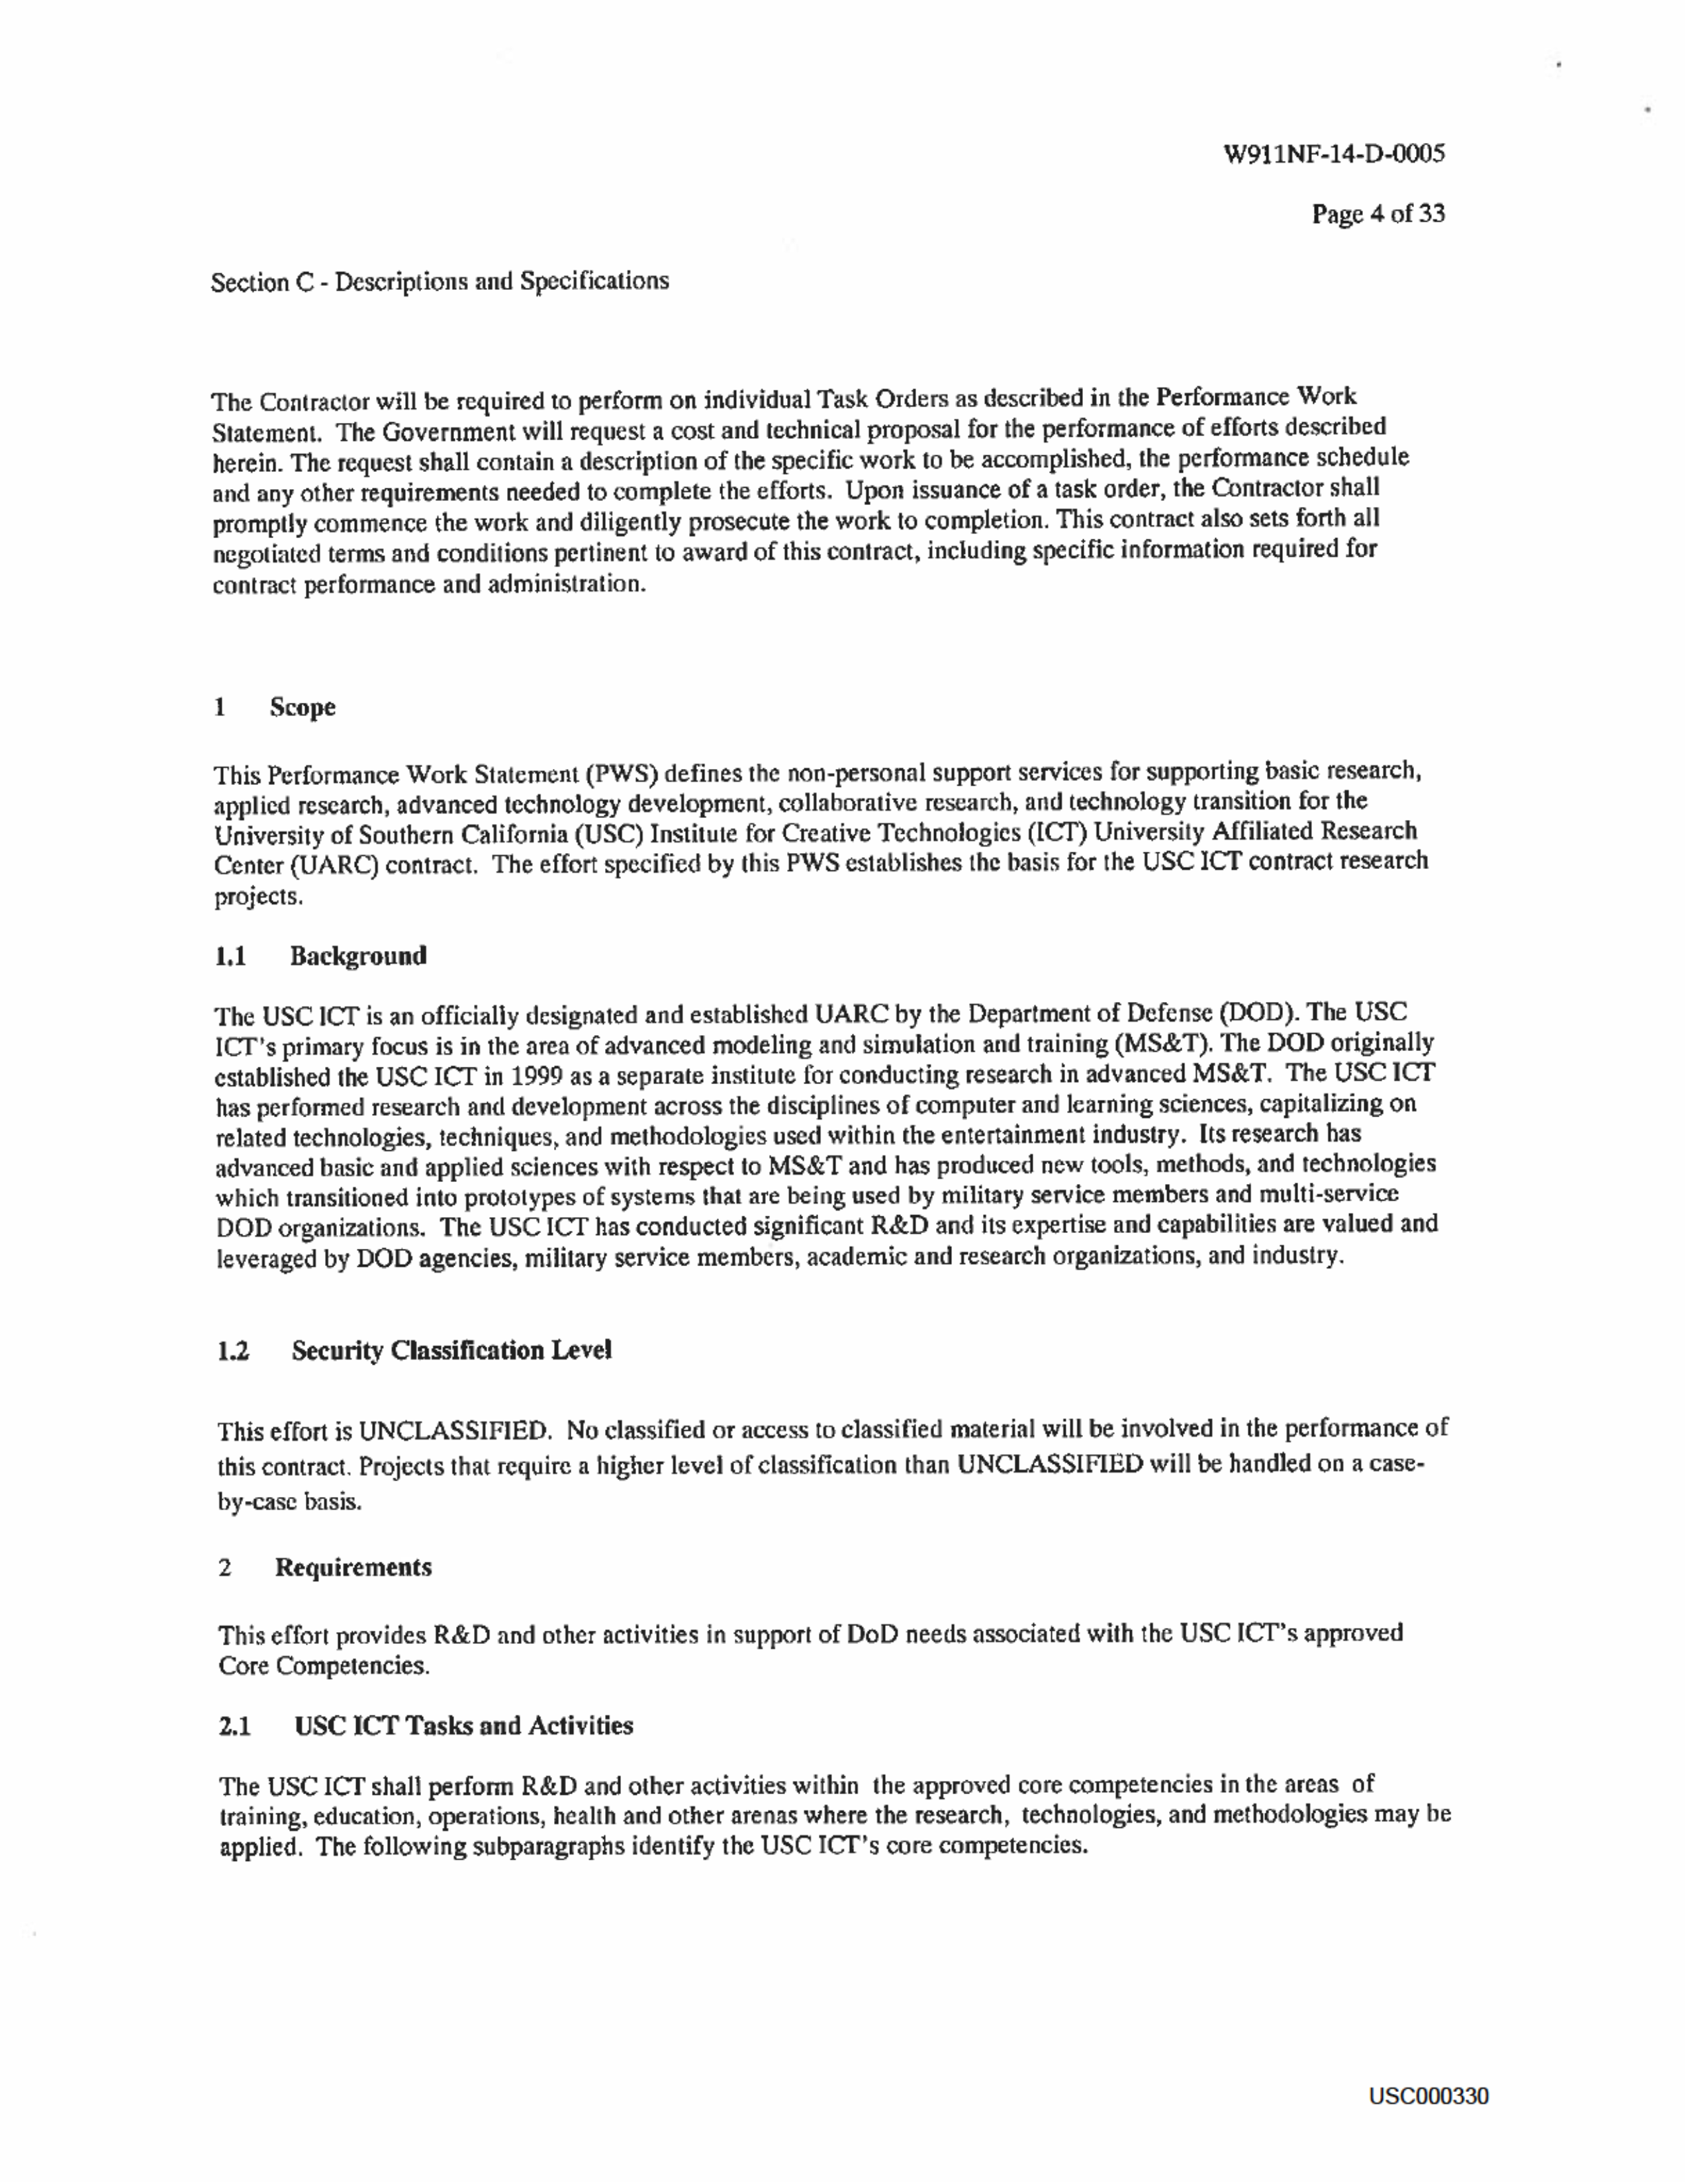 USC's Investigation Report re Hao Li's and Pinscreen's Scientific Misconduct at ACM SIGGRAPH RTL 2017 - Full Report Page 332